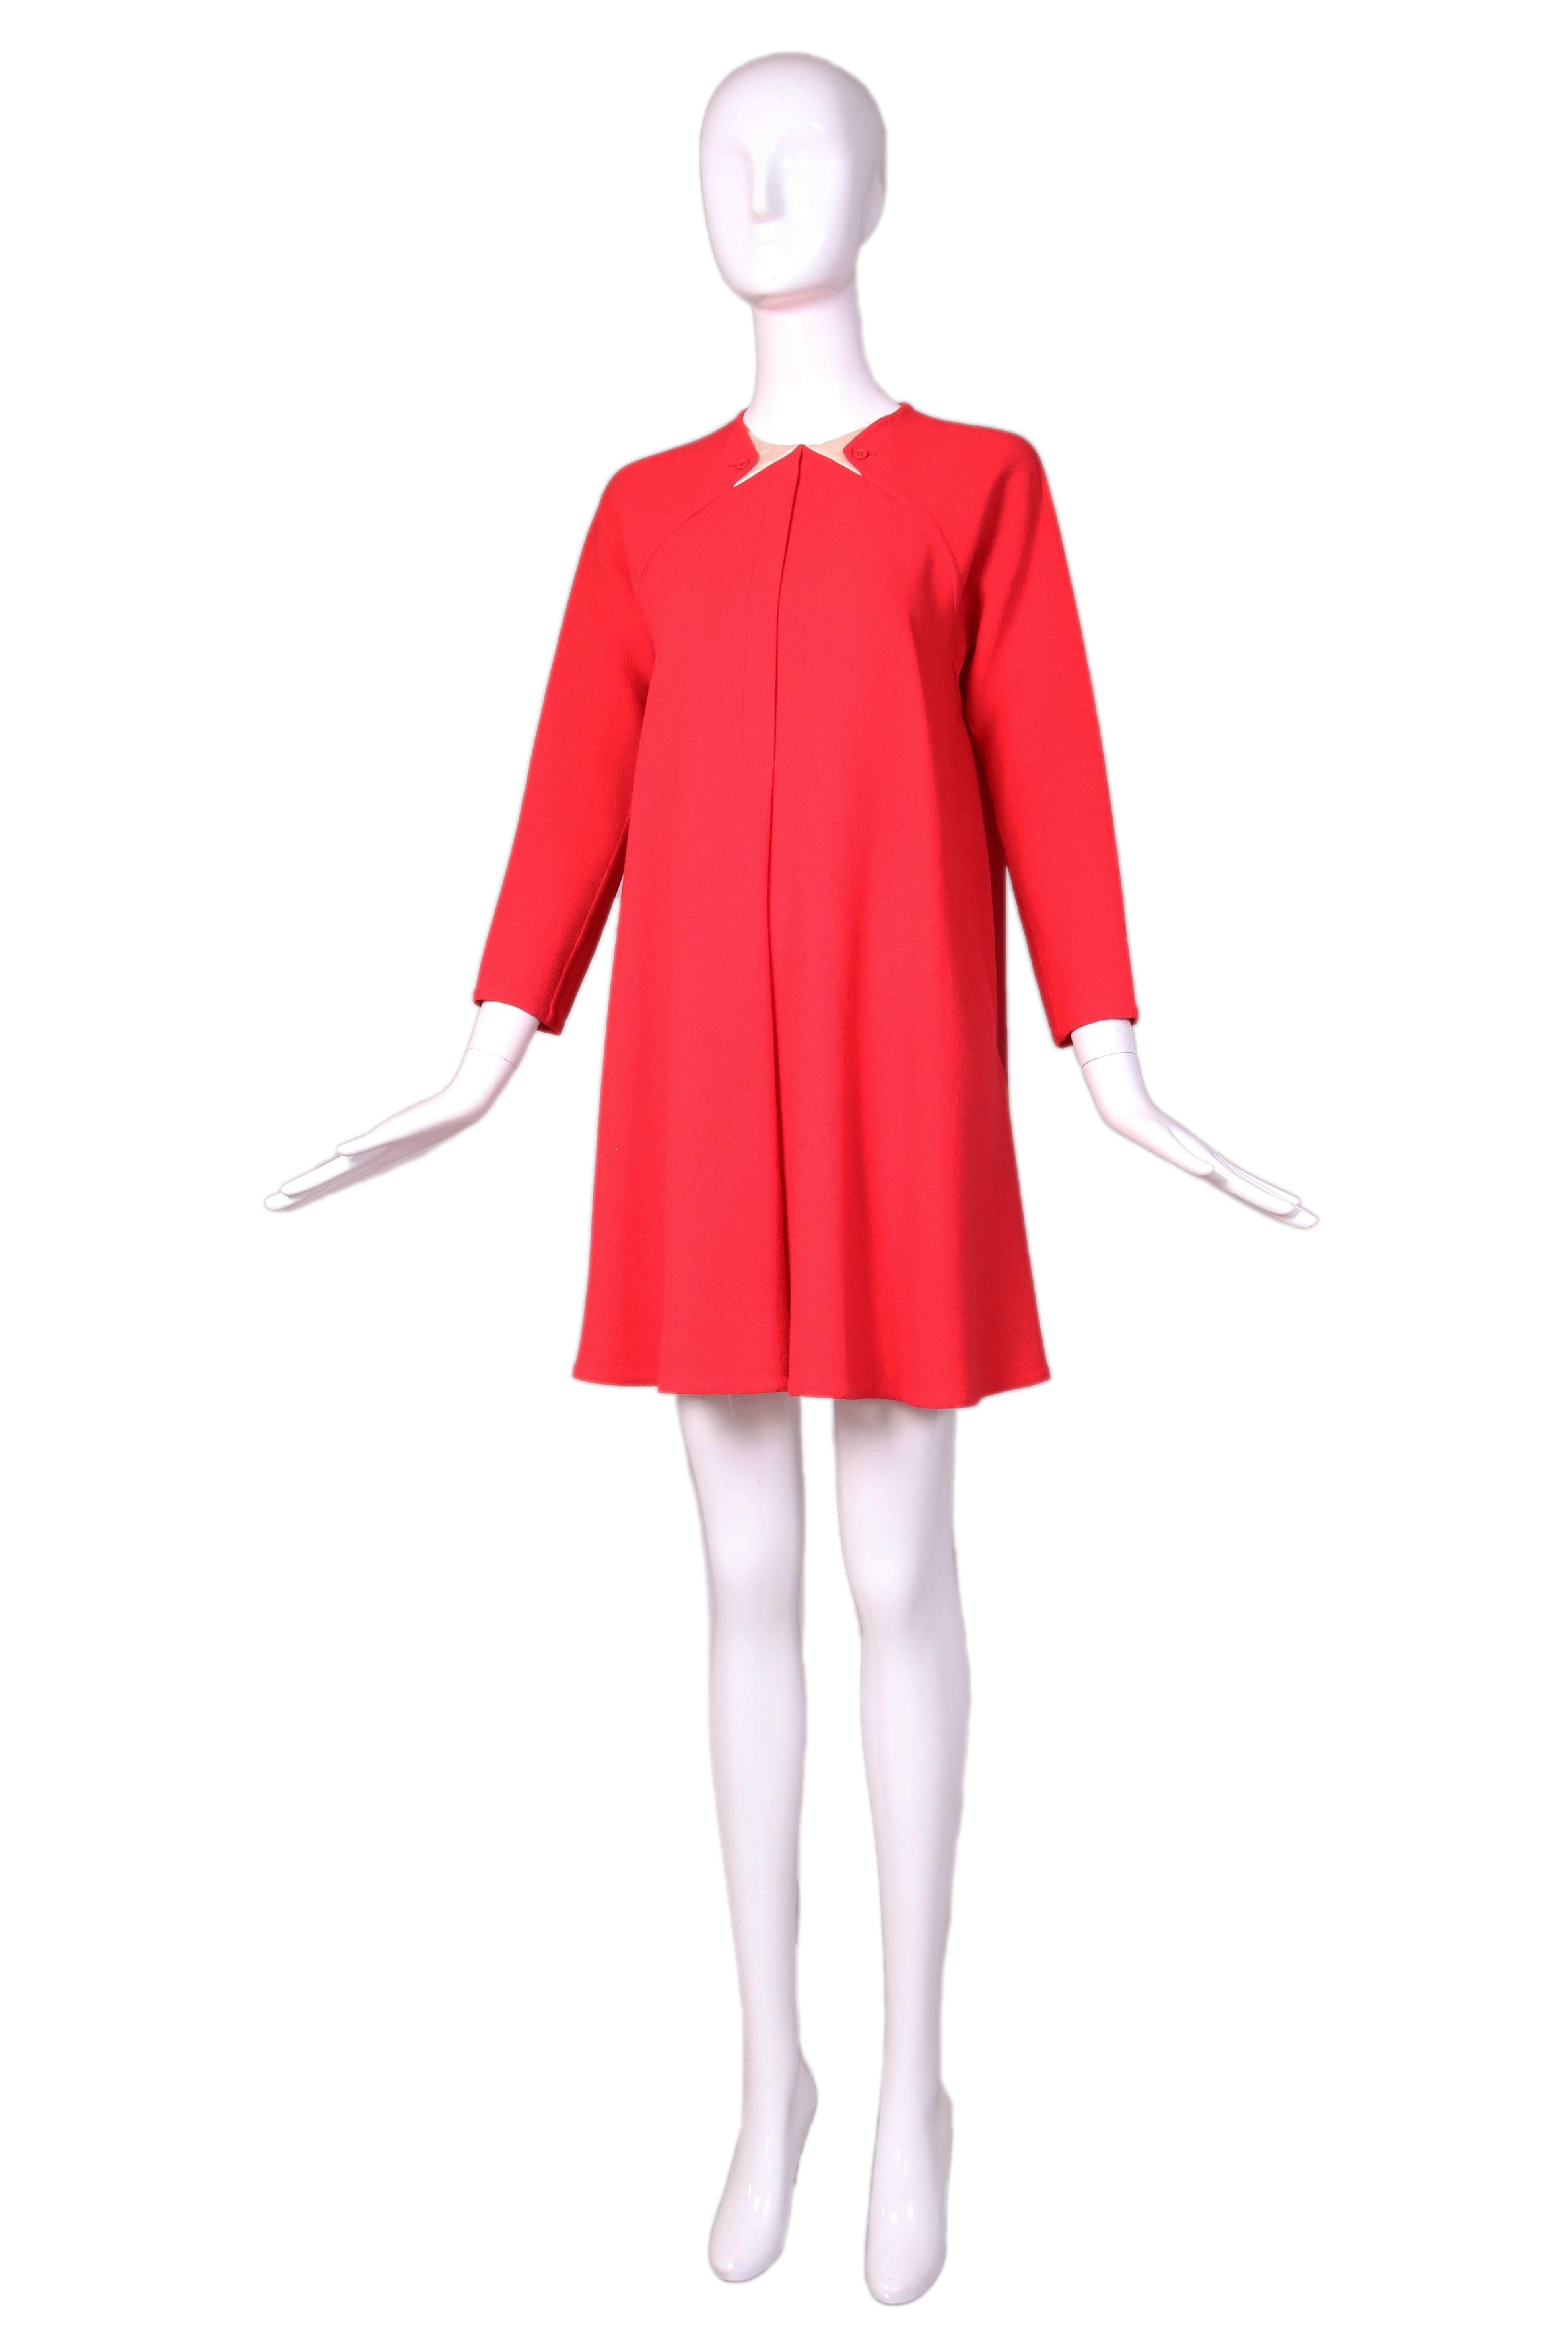 1990's Geoffrey Beene red wool crepe swing dress with signature inlaid geometric collar detail. In excellent condition. No size tag so please consult measurements.
MEASUREMENTS:
Bust - 38